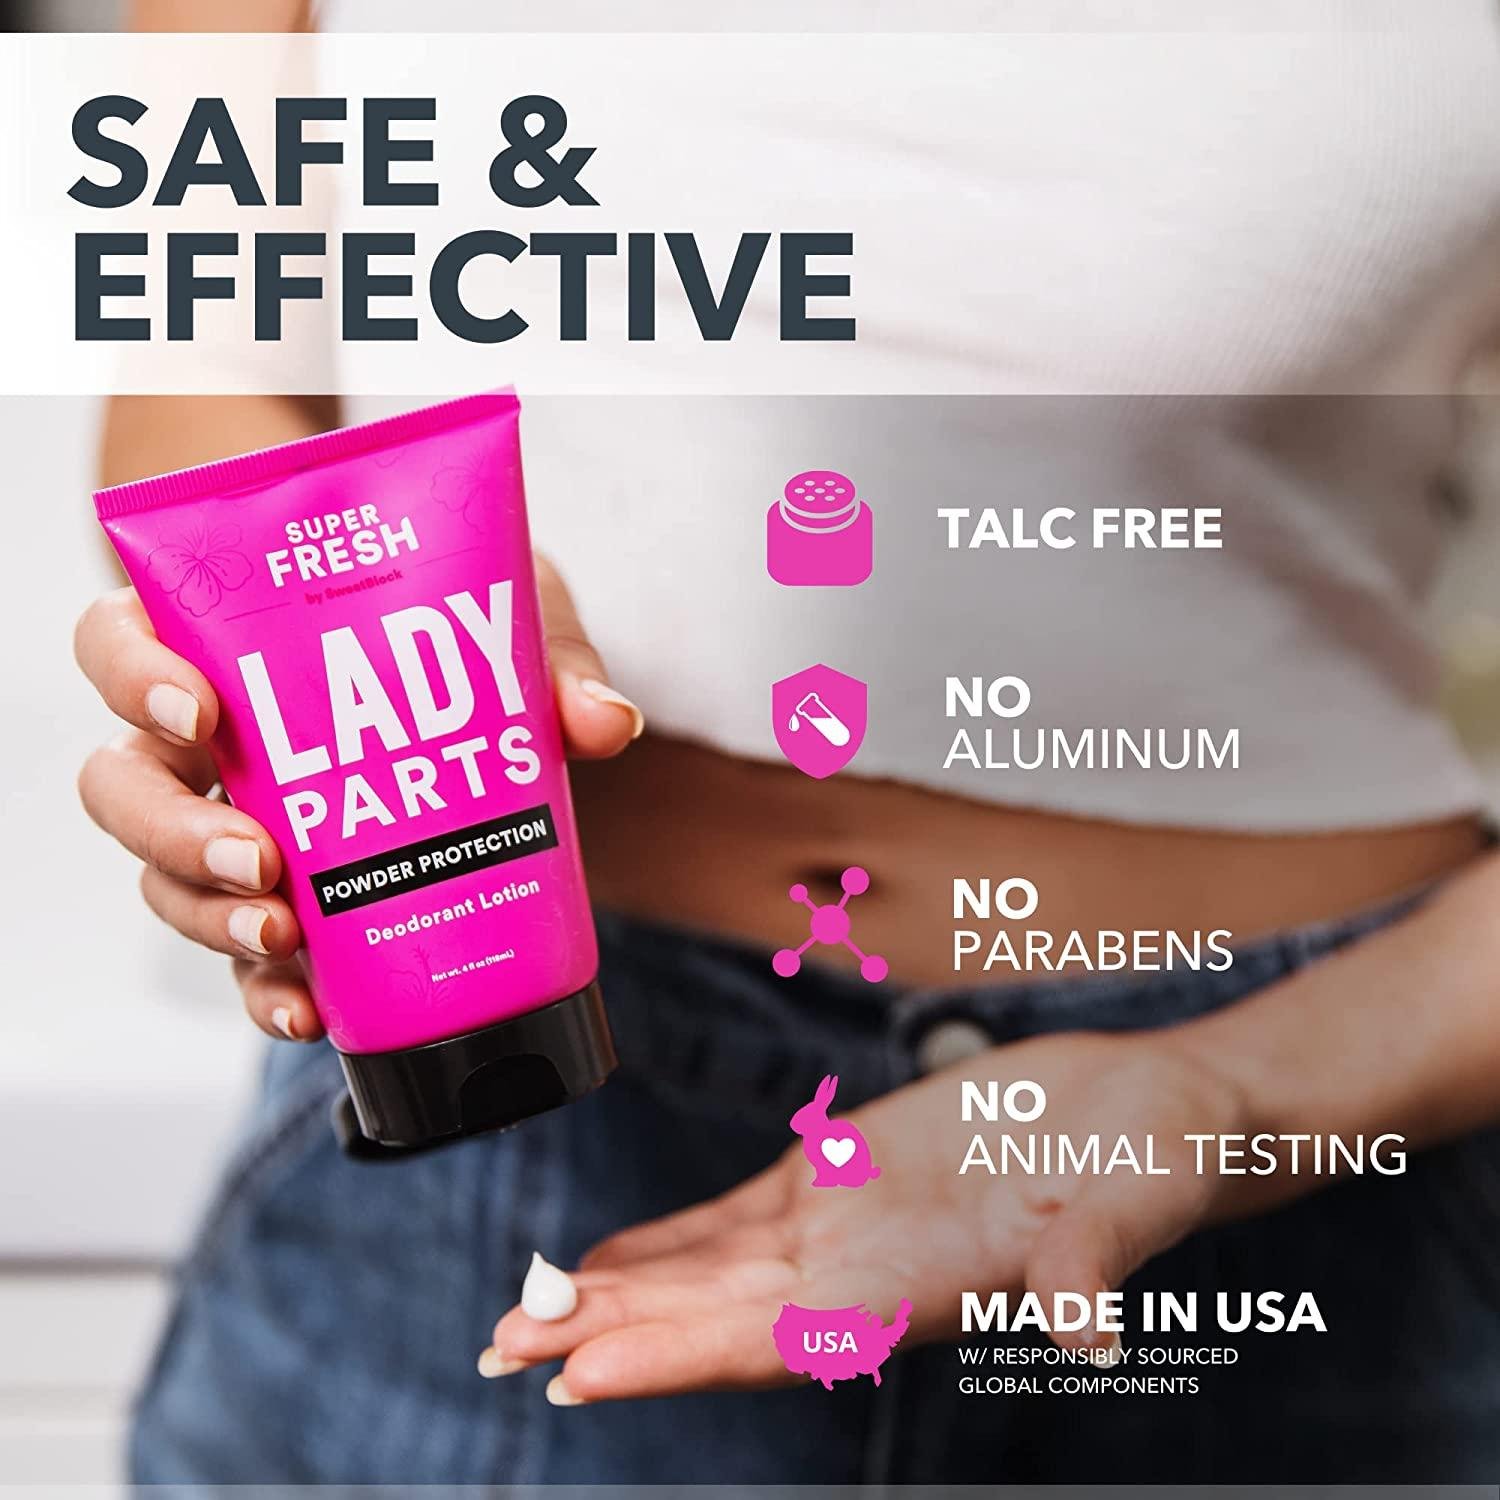  Lady Parts Feminine Hygiene Body Powder Deodorant Lotion For Breasts, Private P 5